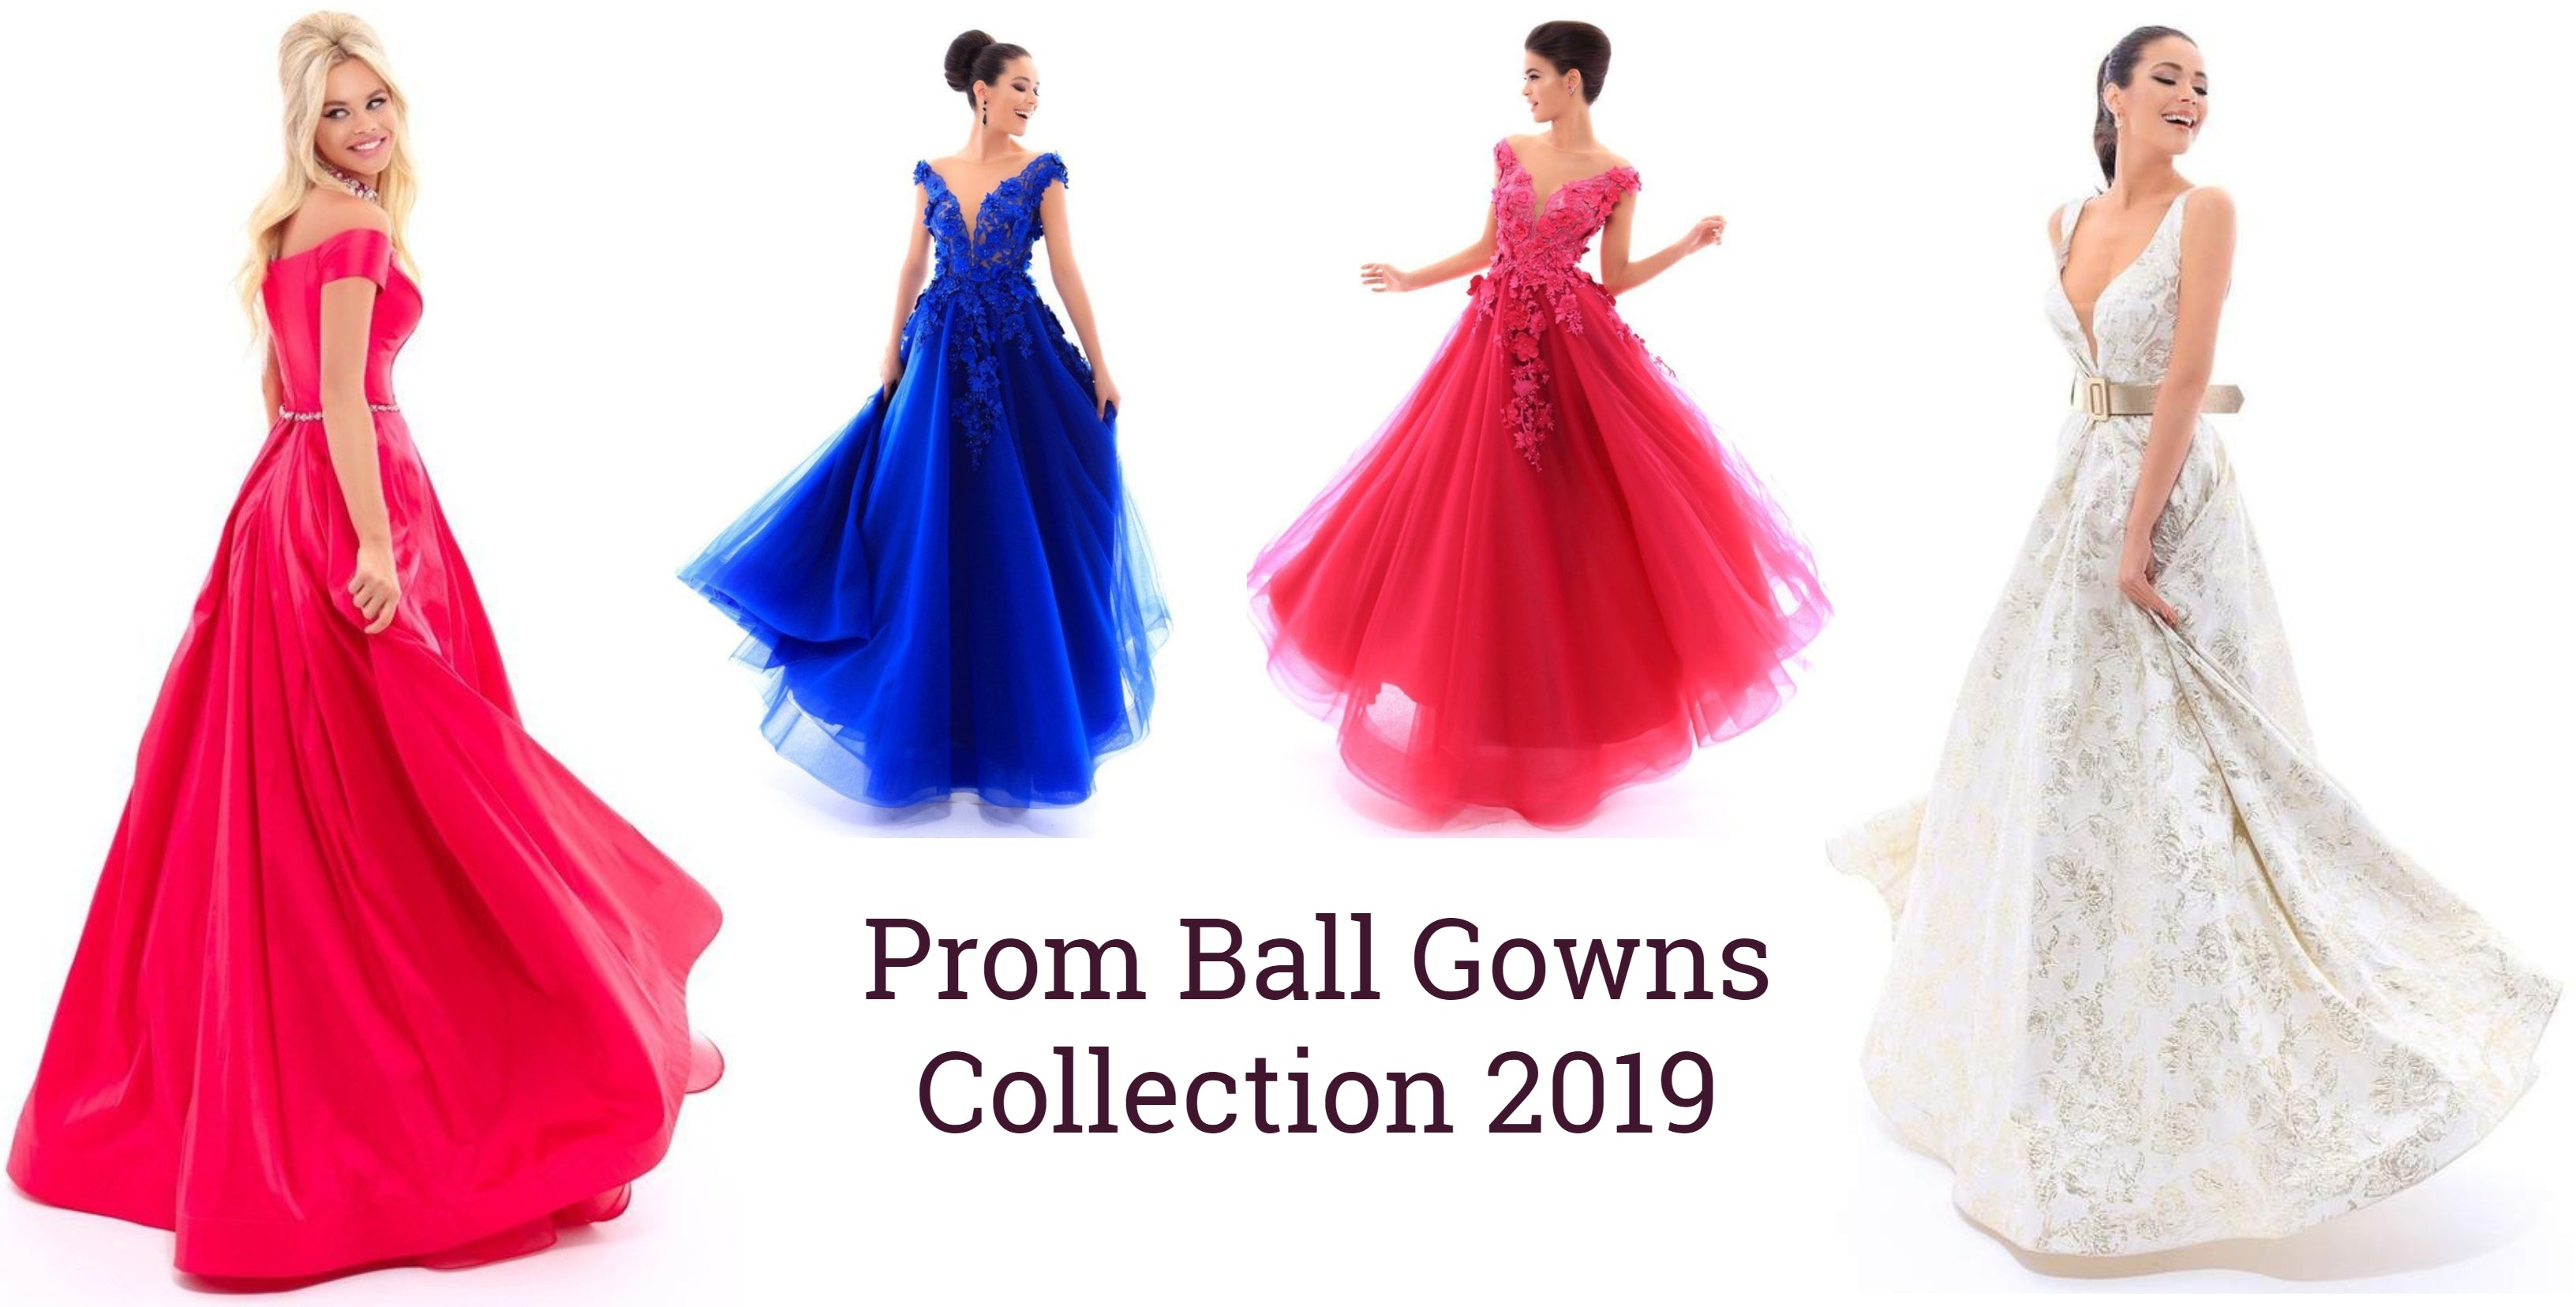 Exotic Prom Ball Gown Dresses Suggestions That Must Be in Your Wardrobe